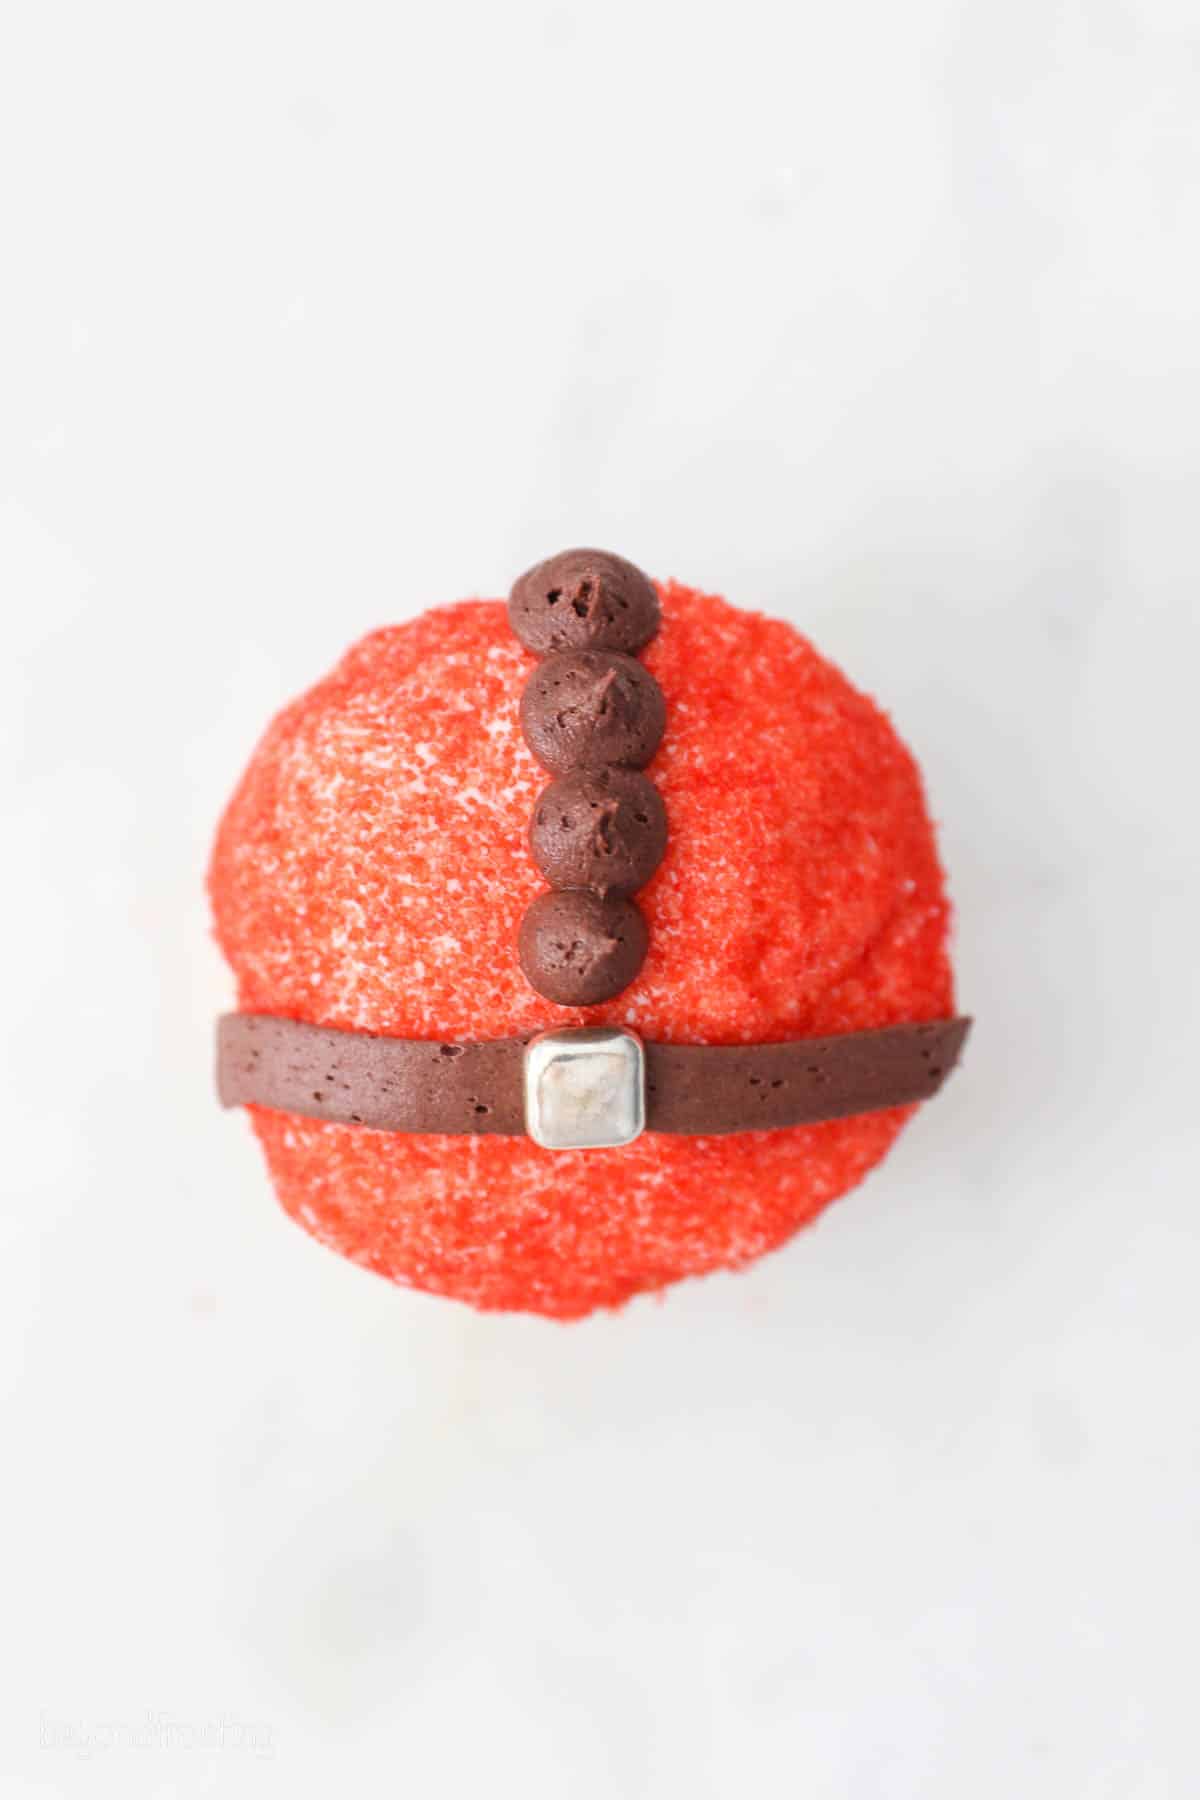 Overhead view of a cupcake decorated to look like Santa's red suit, with a brown frosting belt and buttons.